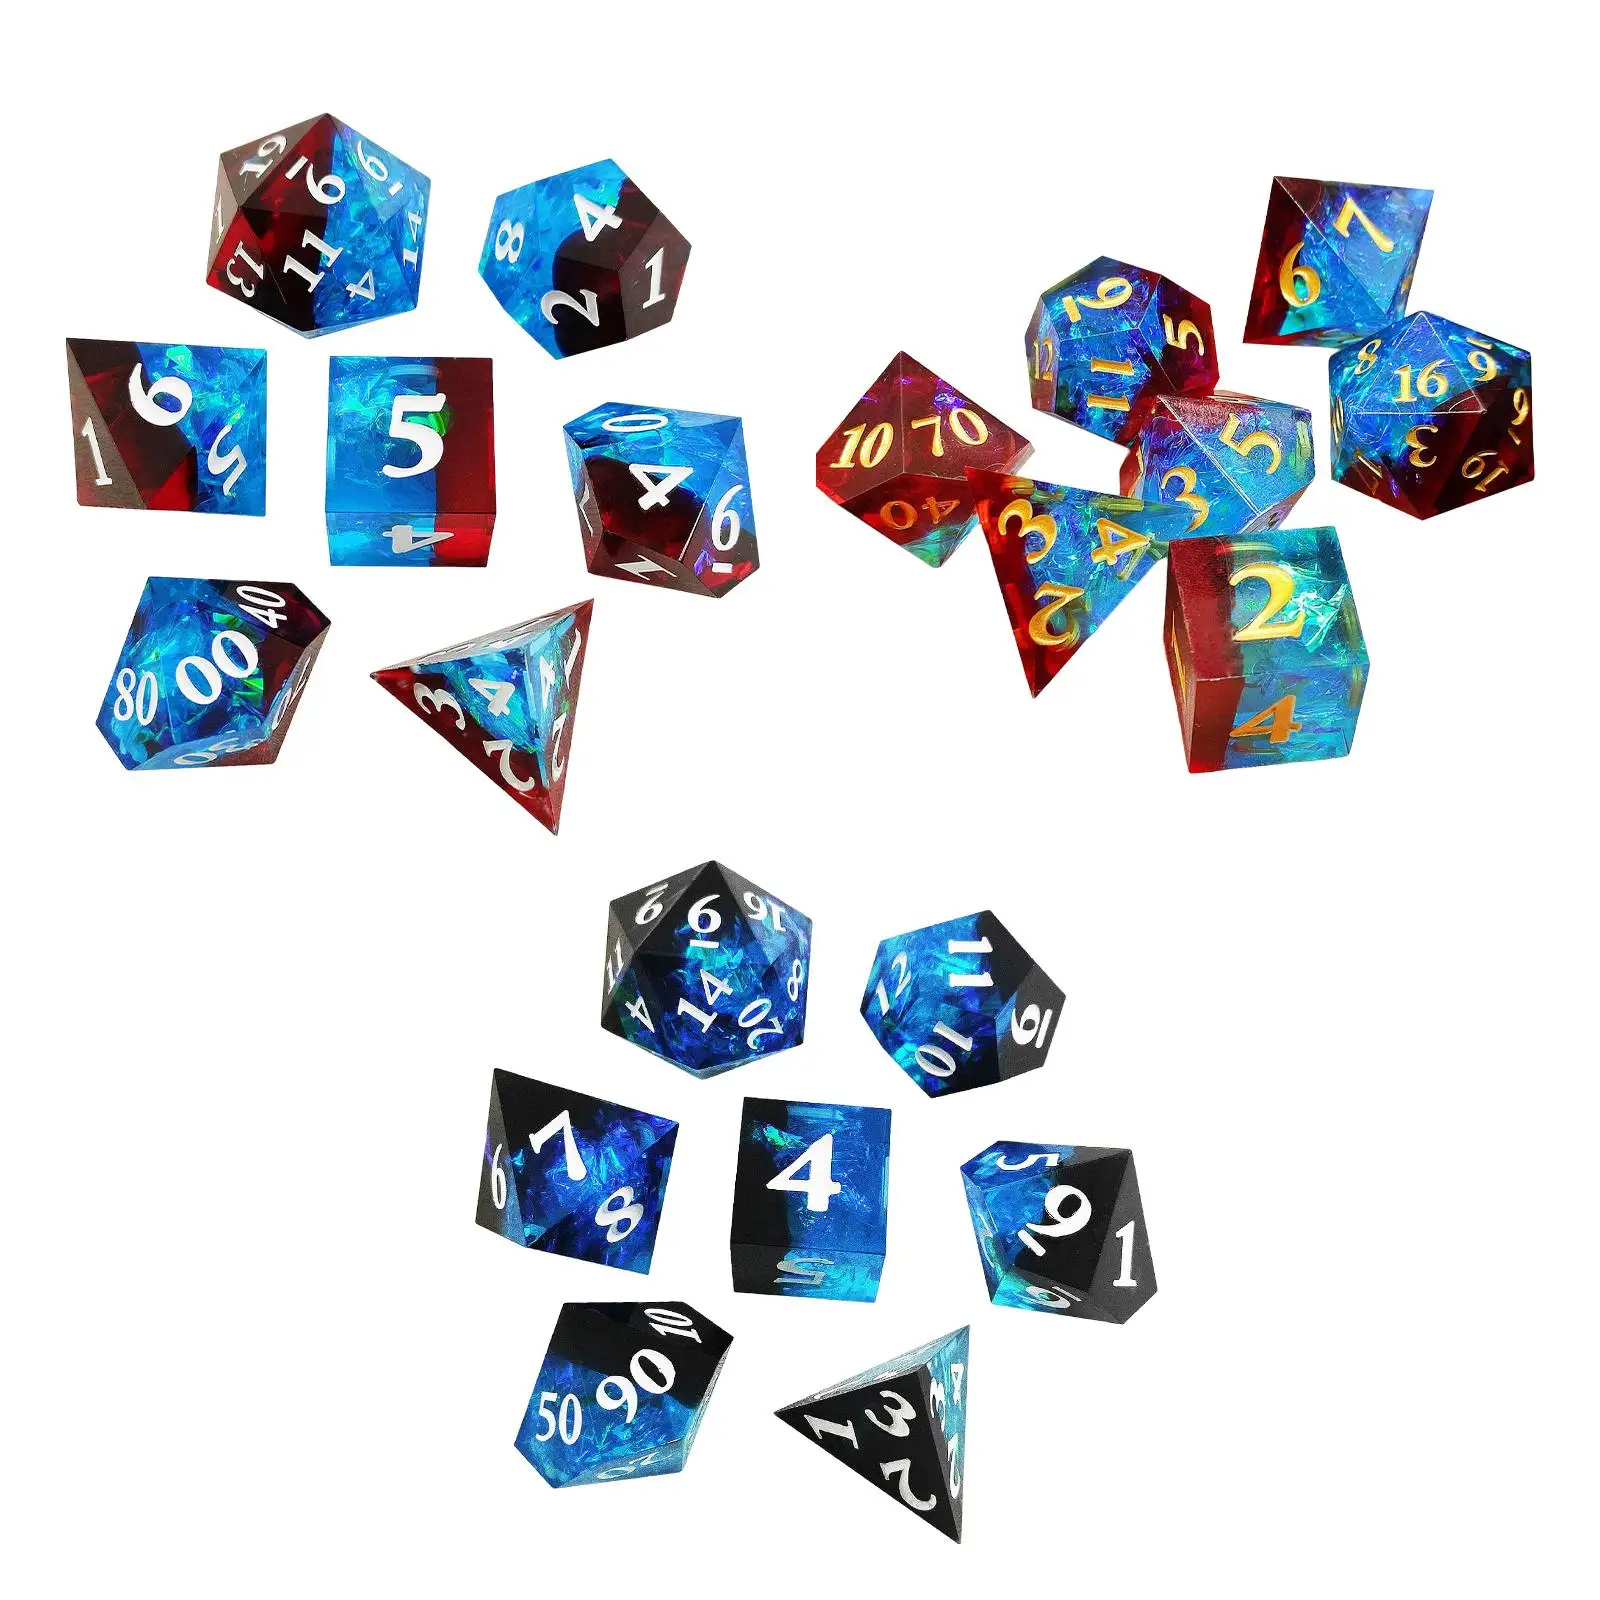 7Pcs Resin Polyhedral Dice D4 D6 D8 D10 D12 D20 Dice Game Party Game Family Table Game for Role Playing Game Cafe Table Board